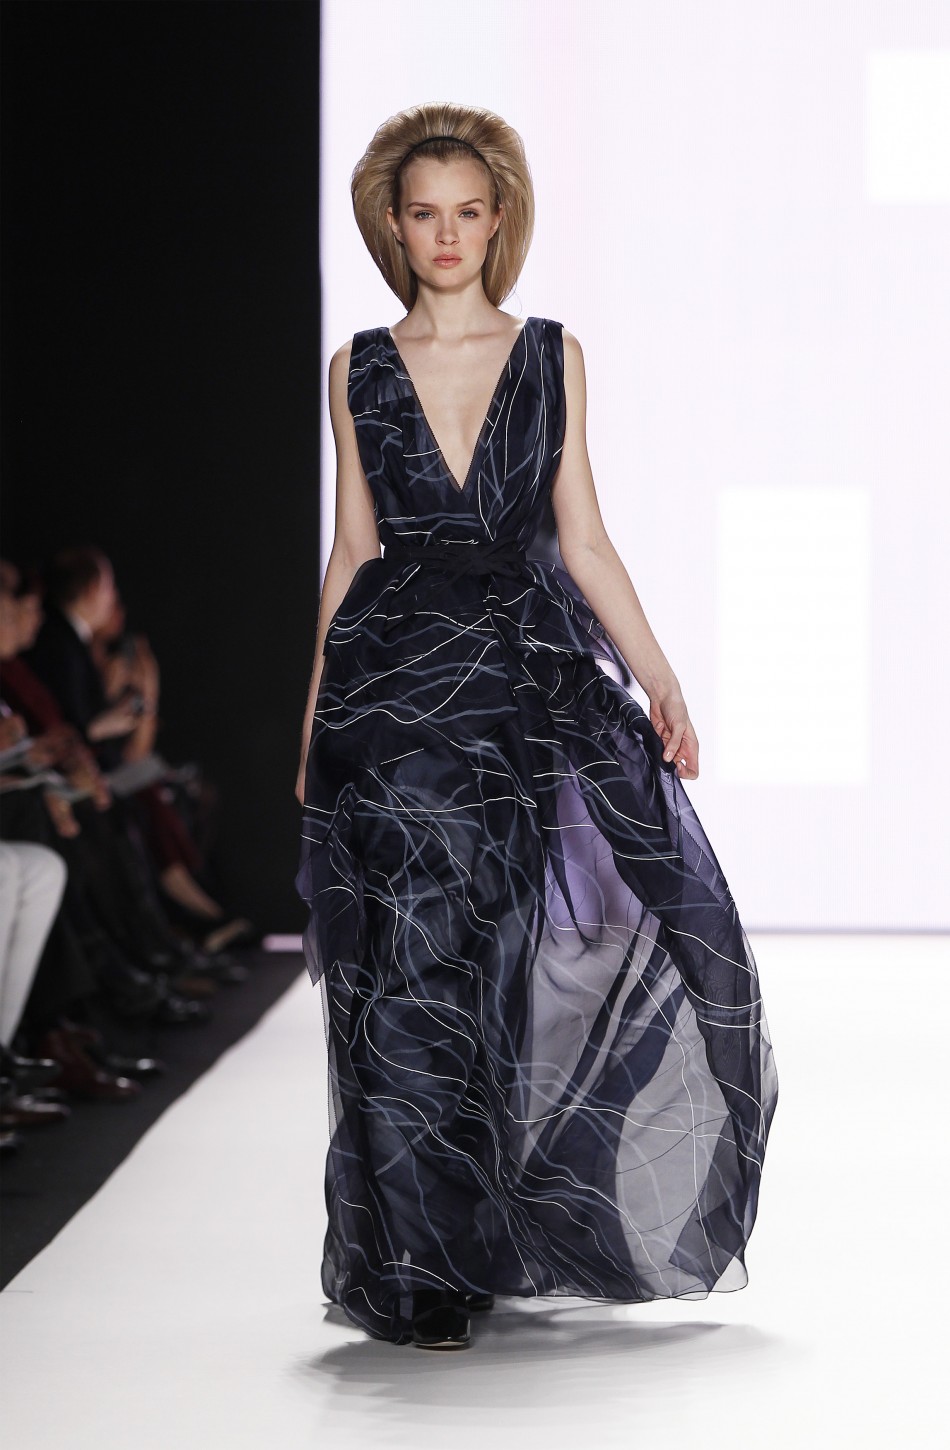 A model presents a creation from the Carolina Herrera FallWinter 2012 collection during New York Fashion Week